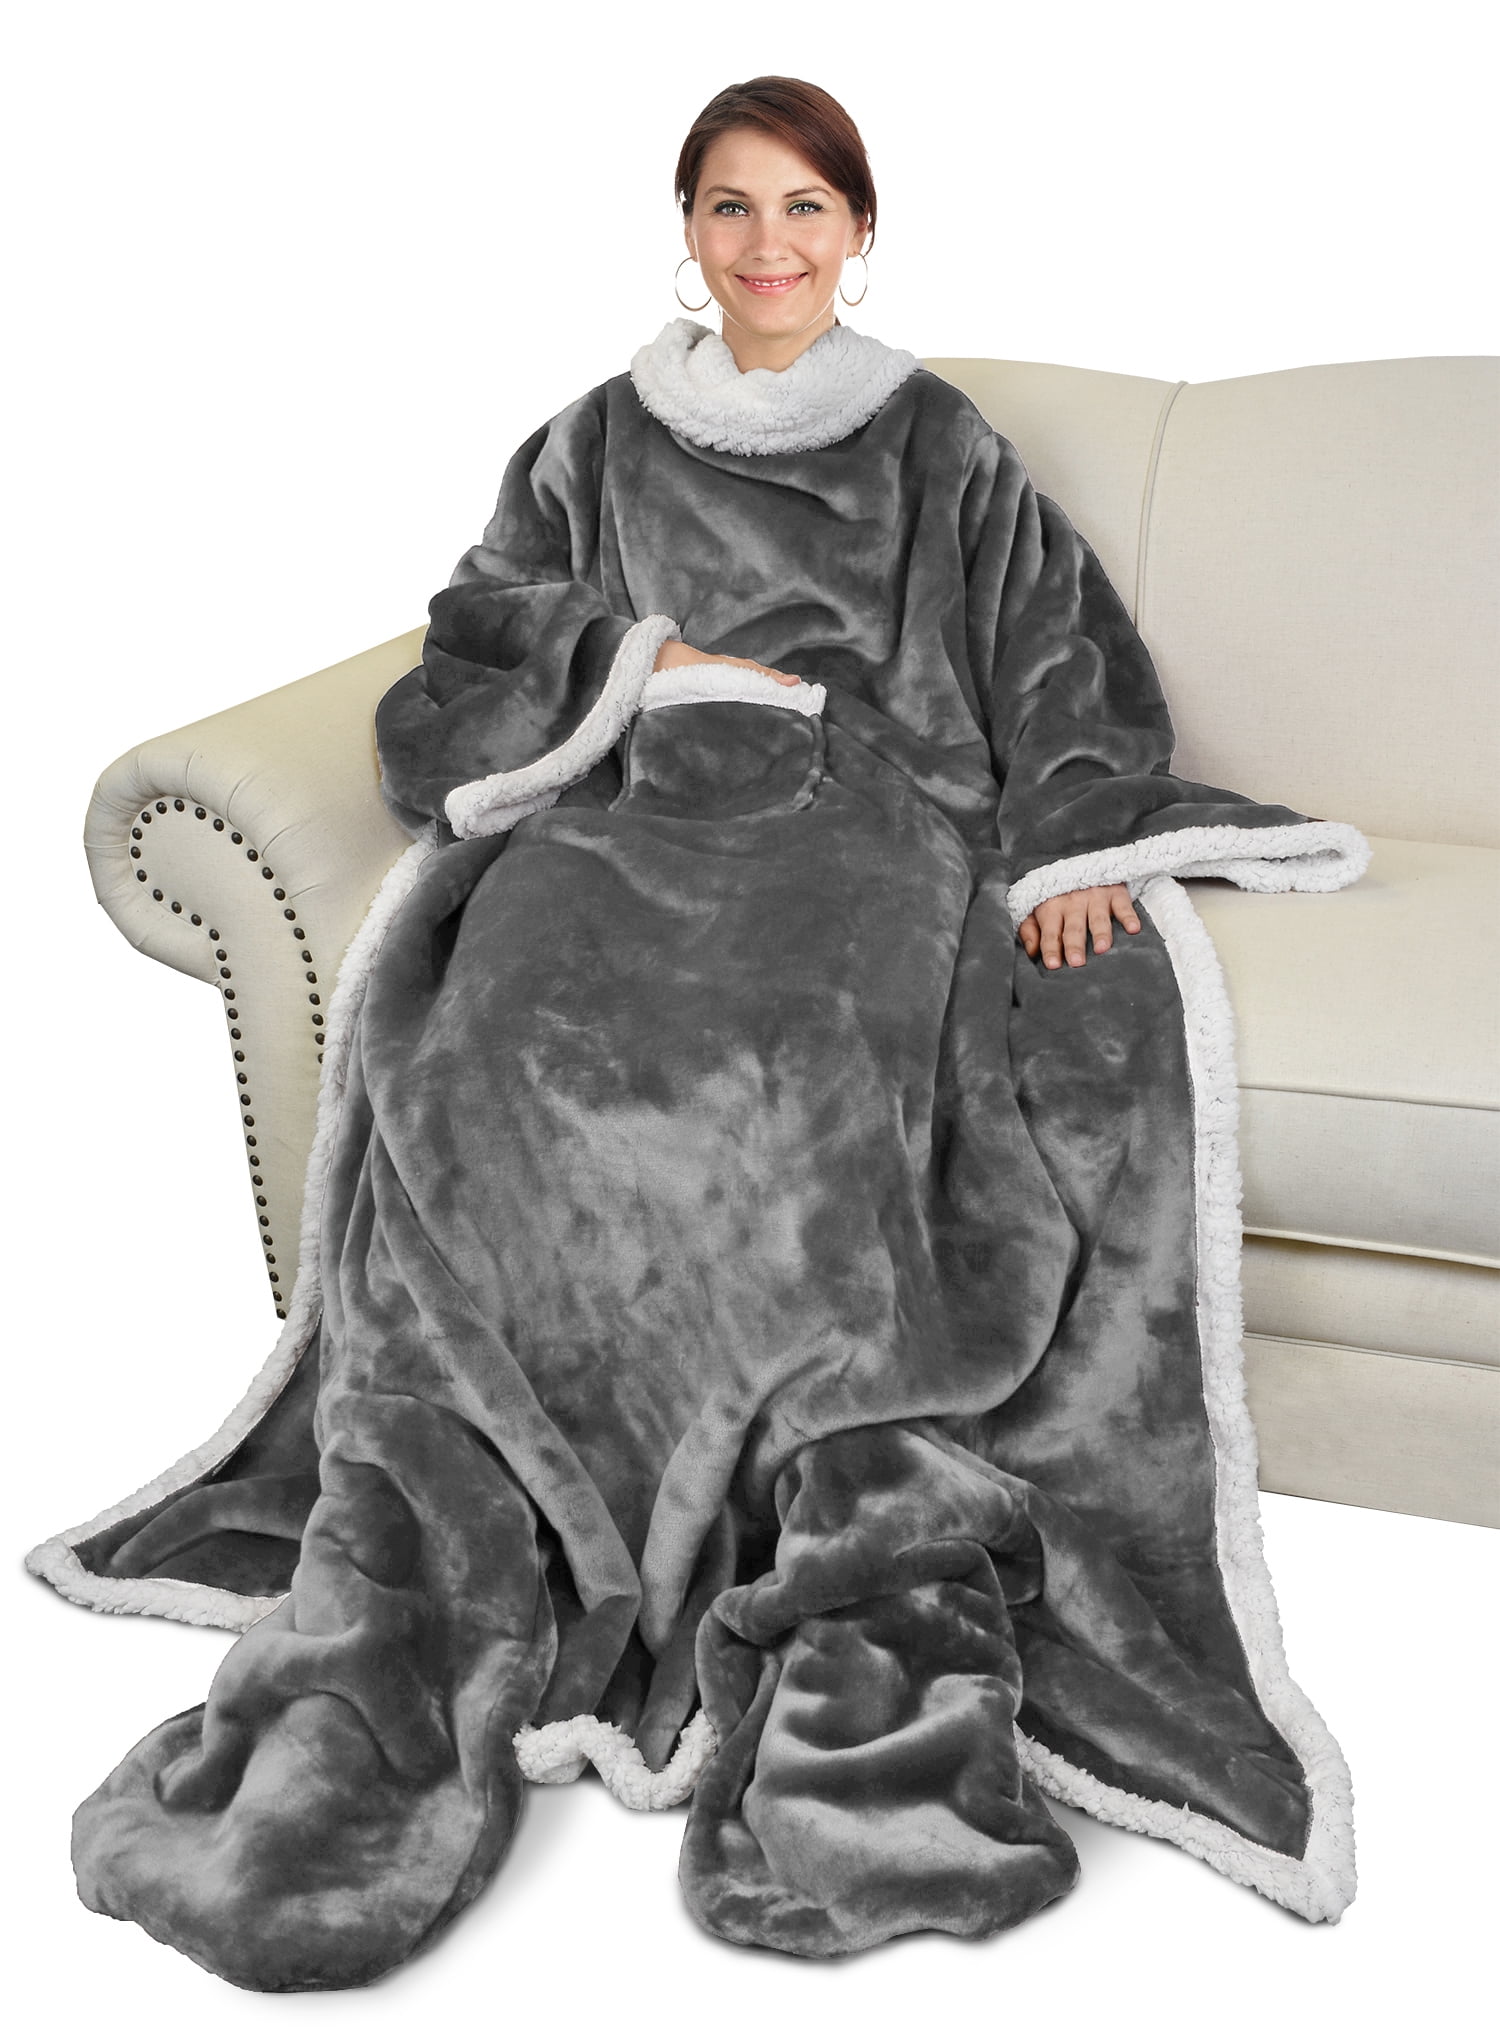 Sherpa Wearable Blanket with Sleeves  Foot Pockets for Adult Women Men,  Comfy Snuggle Wrap Sleeved Throw Blanket Robe, Gift Idea, Grey - Walmart.com